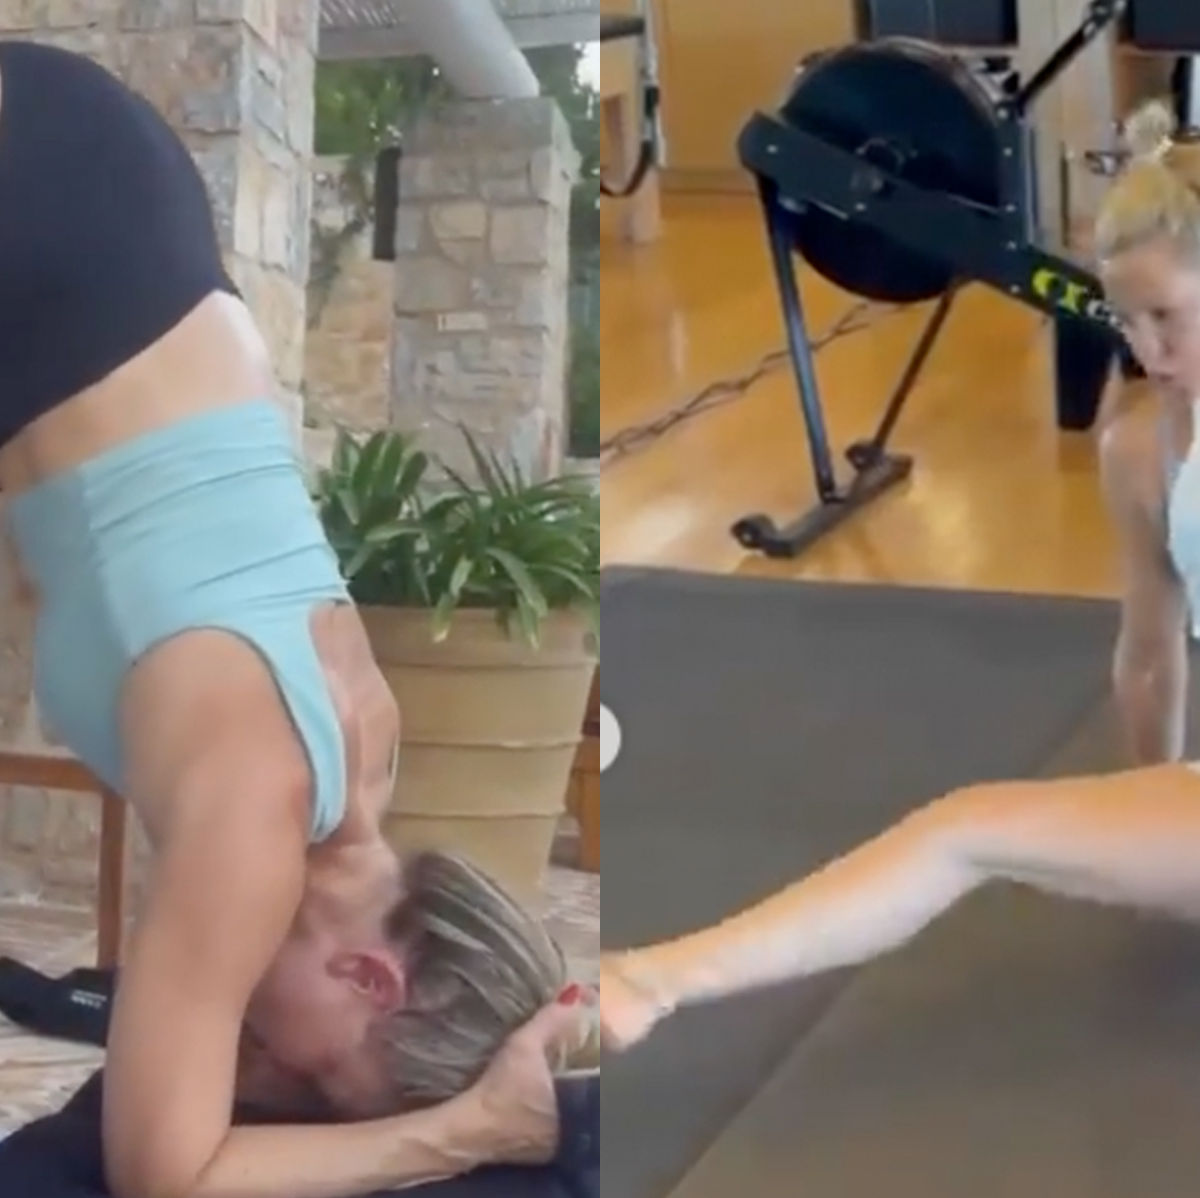 Kate Hudson's intense workout session is all the fitness motivation you  need today